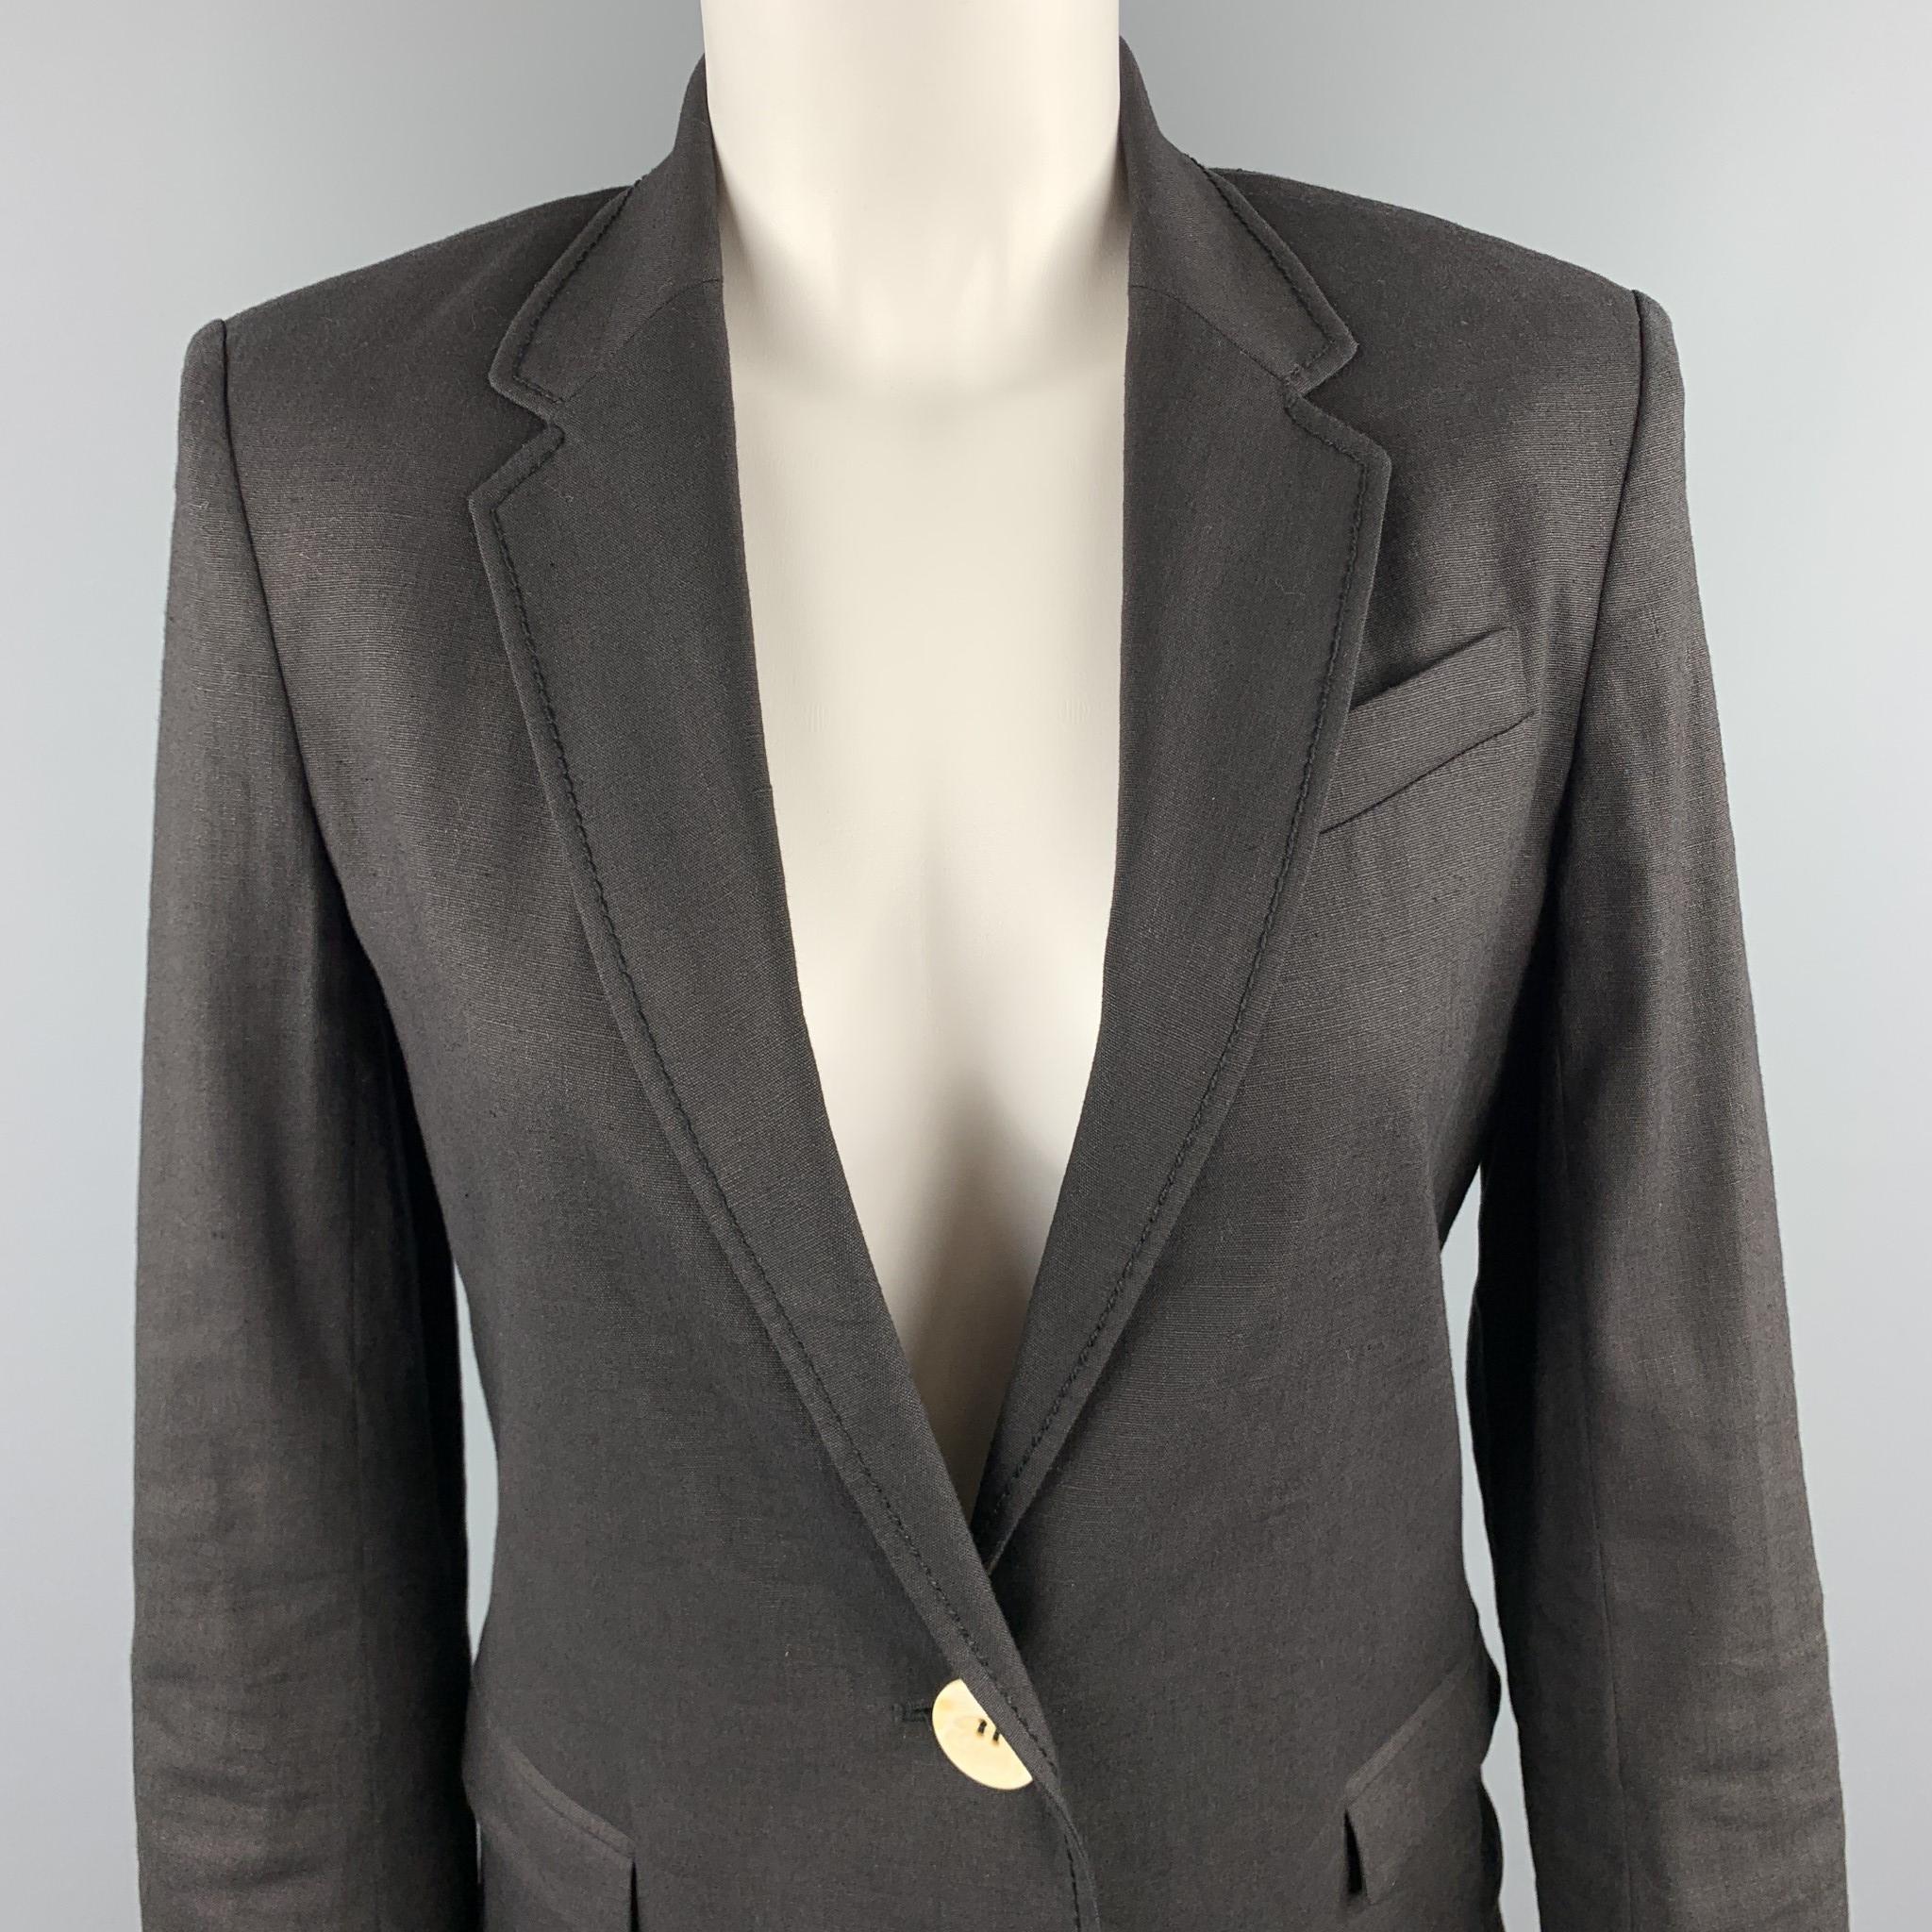 JOSEPH blazer comes in black woven linen blend with a notch lapel and single button closure. Made in France.

Excellent Pre-Owned Condition.
Marked:
Original Retail Price: $825.00

Measurements:

Shoulder: 15 in.
Bust: 35 in.
Sleeve: 24 in.
Length: